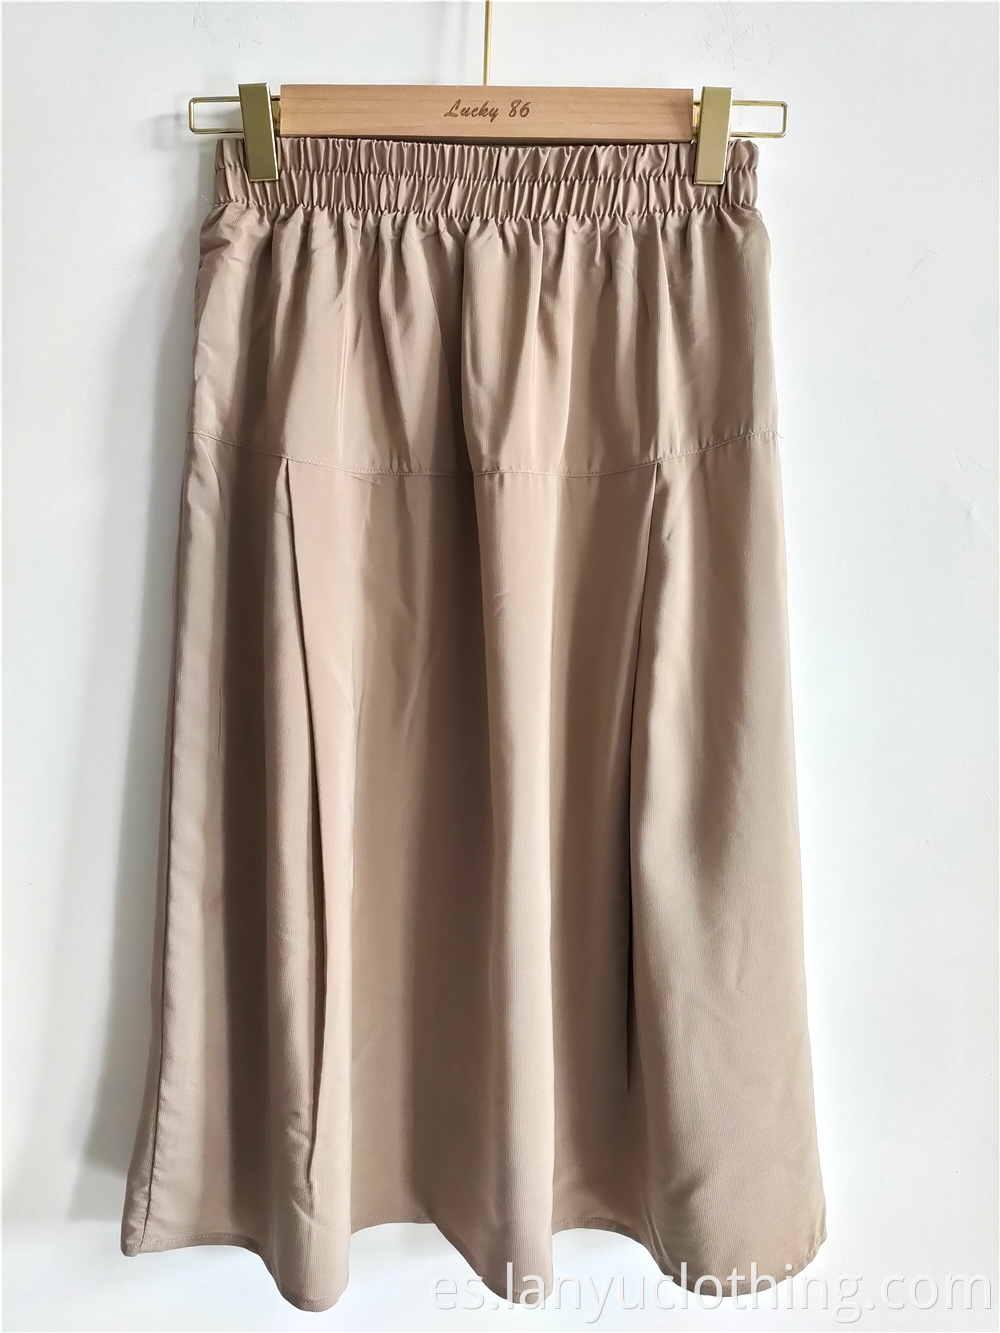 Women's Spring Cream-Colored Leisure Skirts